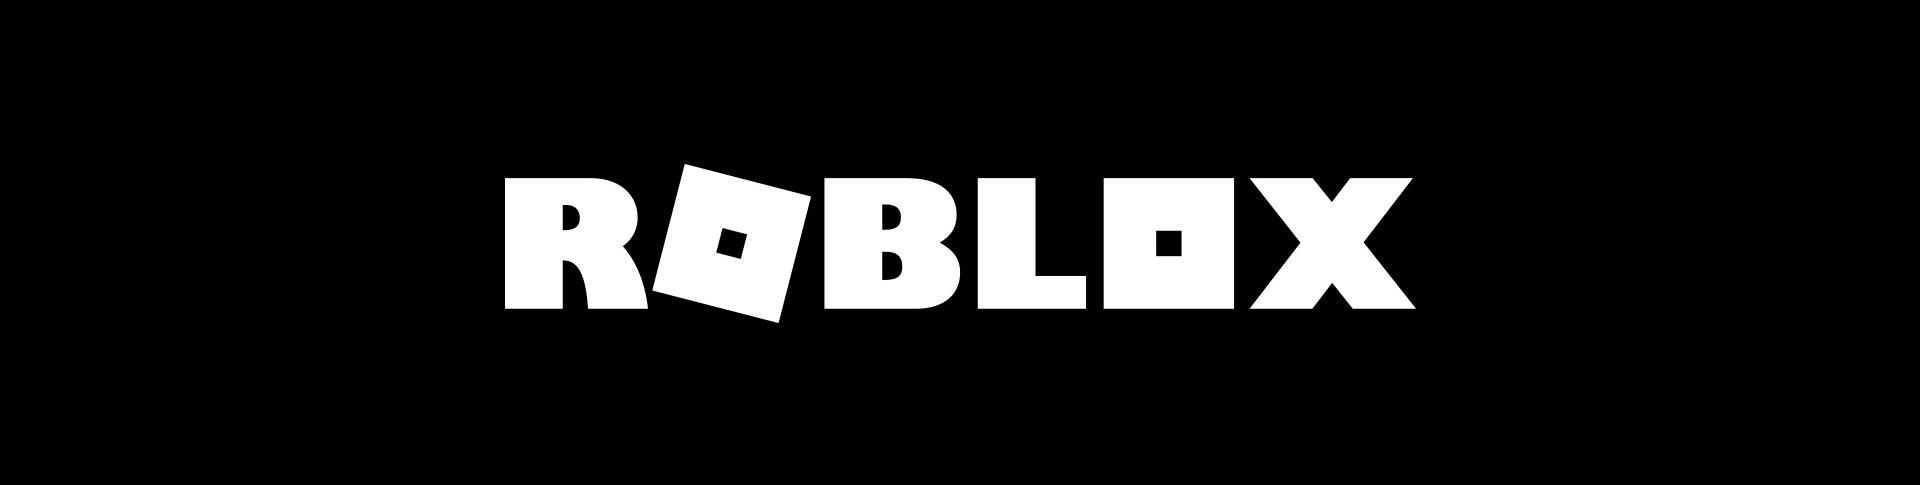 A Complete History Of The Roblox Logo Pocket Tactics - roblox clothes codes included radical